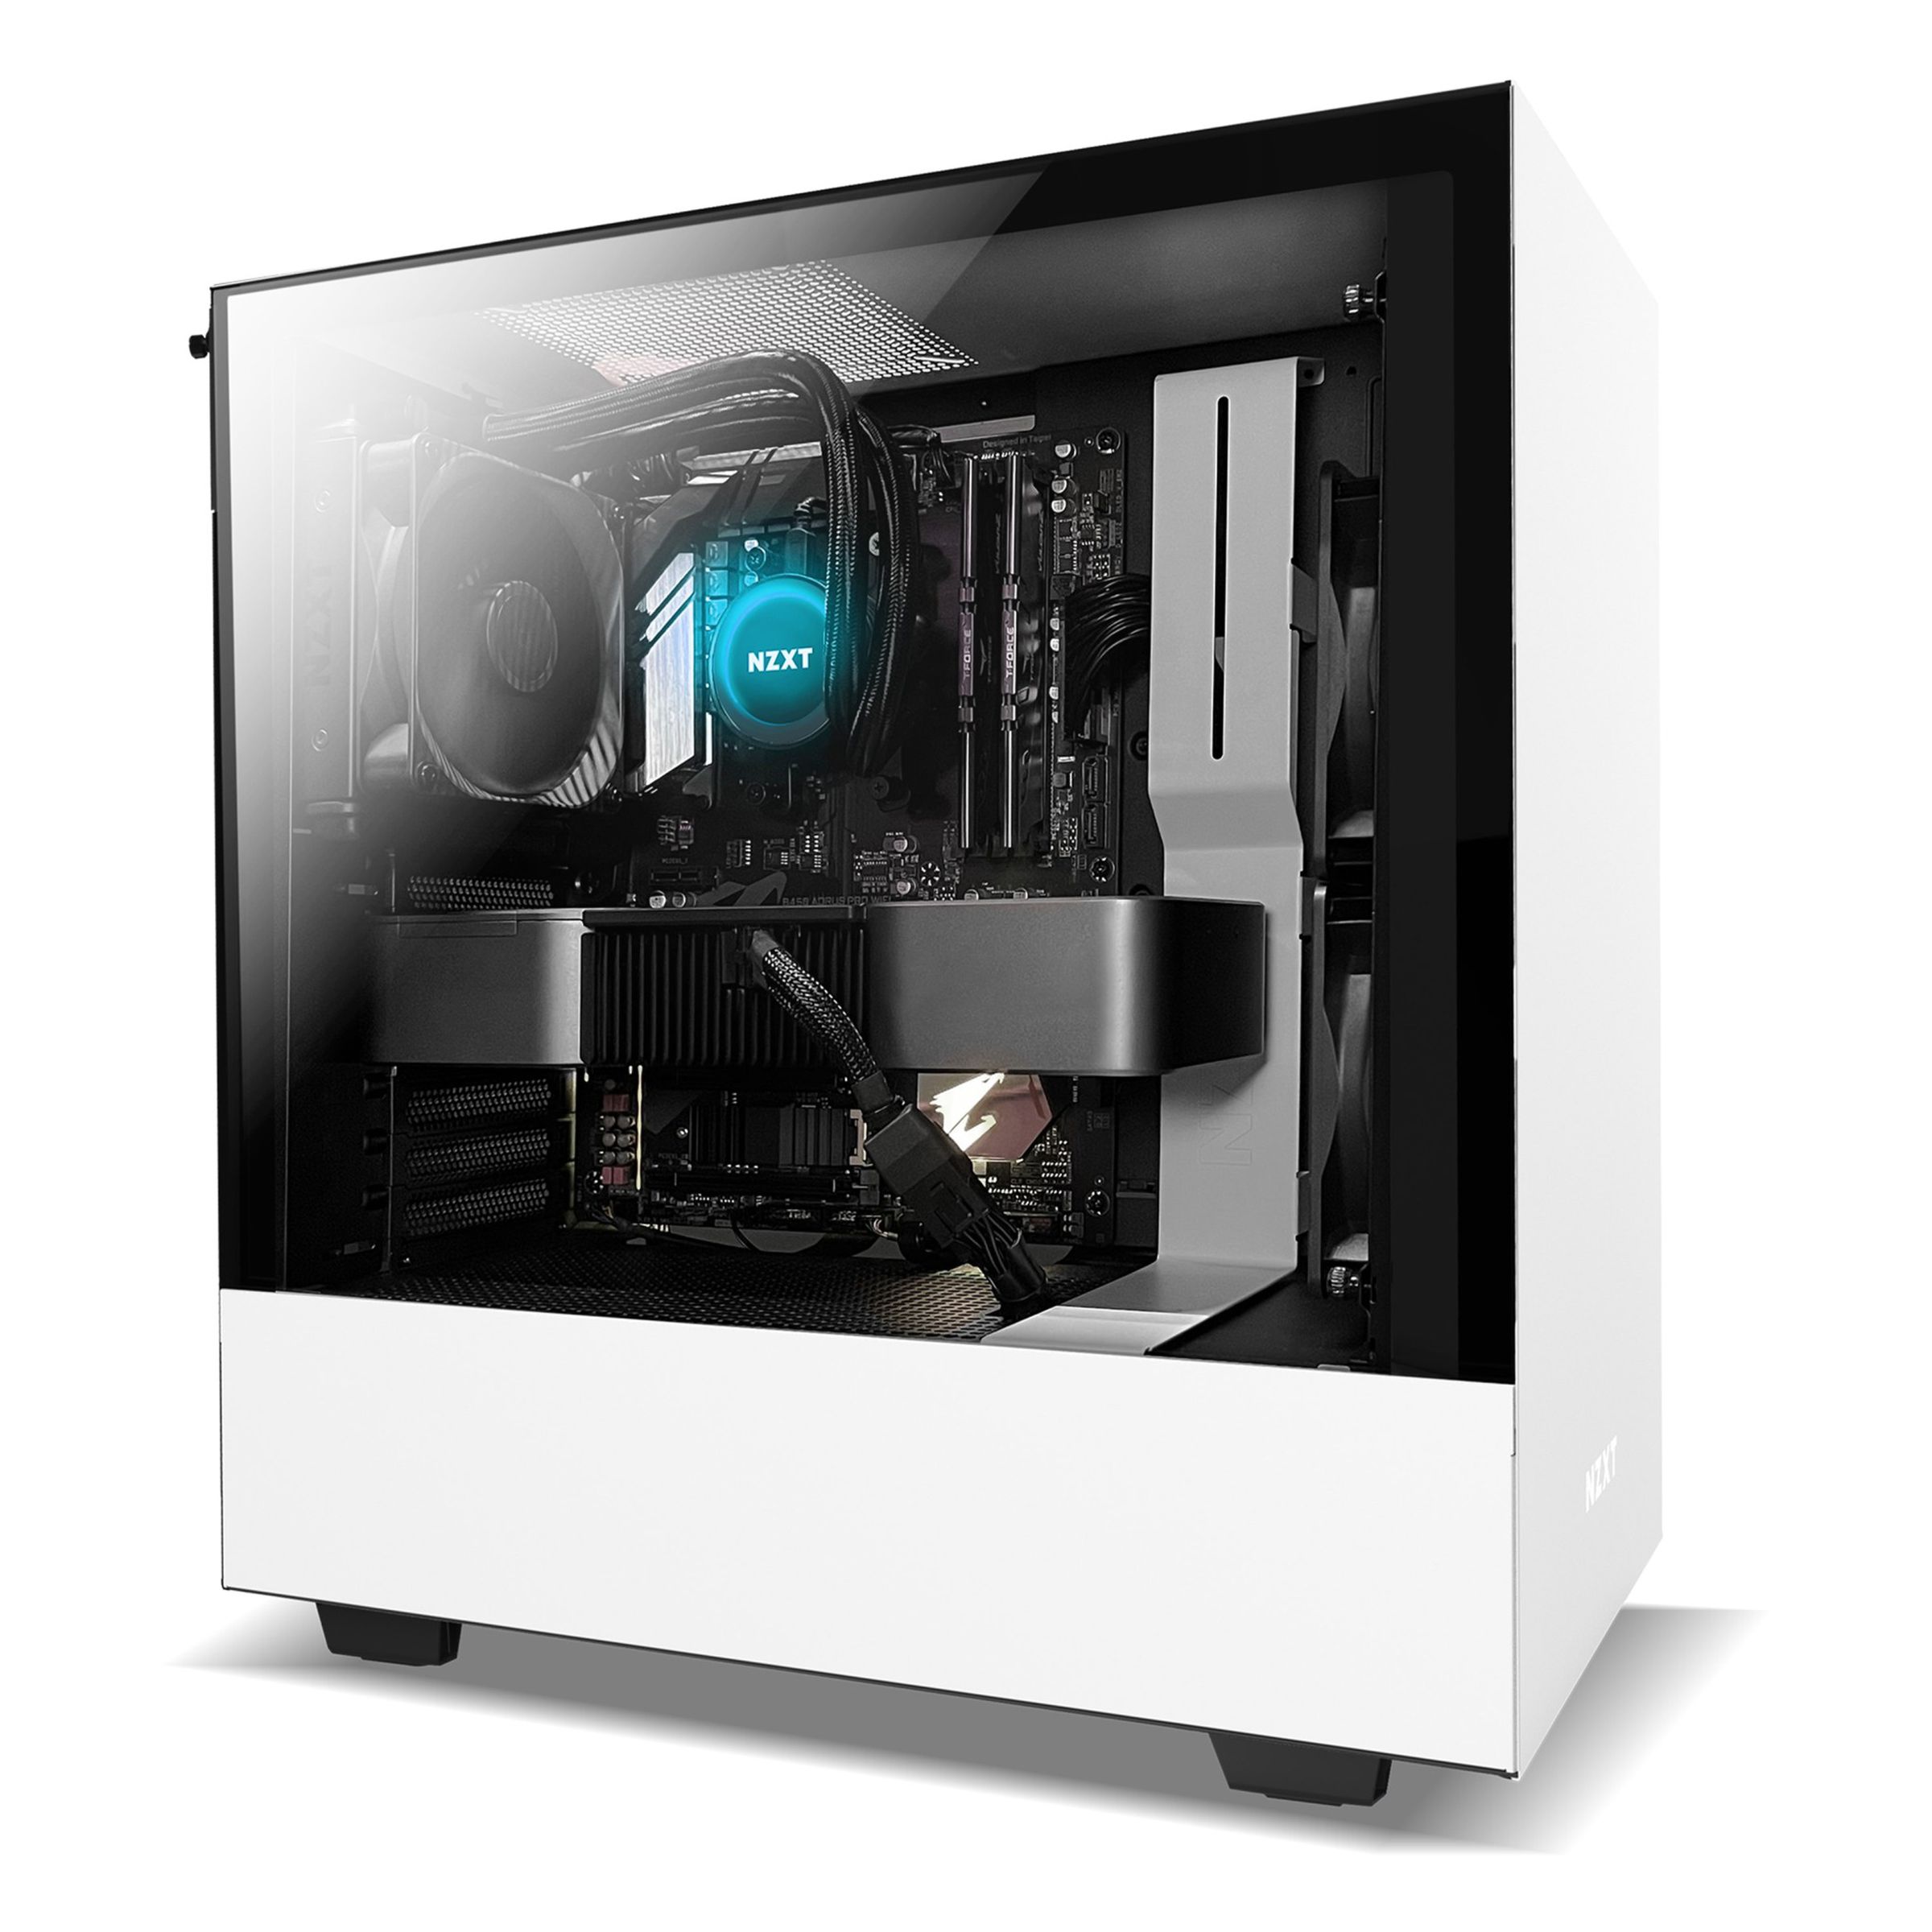 NZXT’s PC comes prebuilt in the company’s own Kraken M22 case.